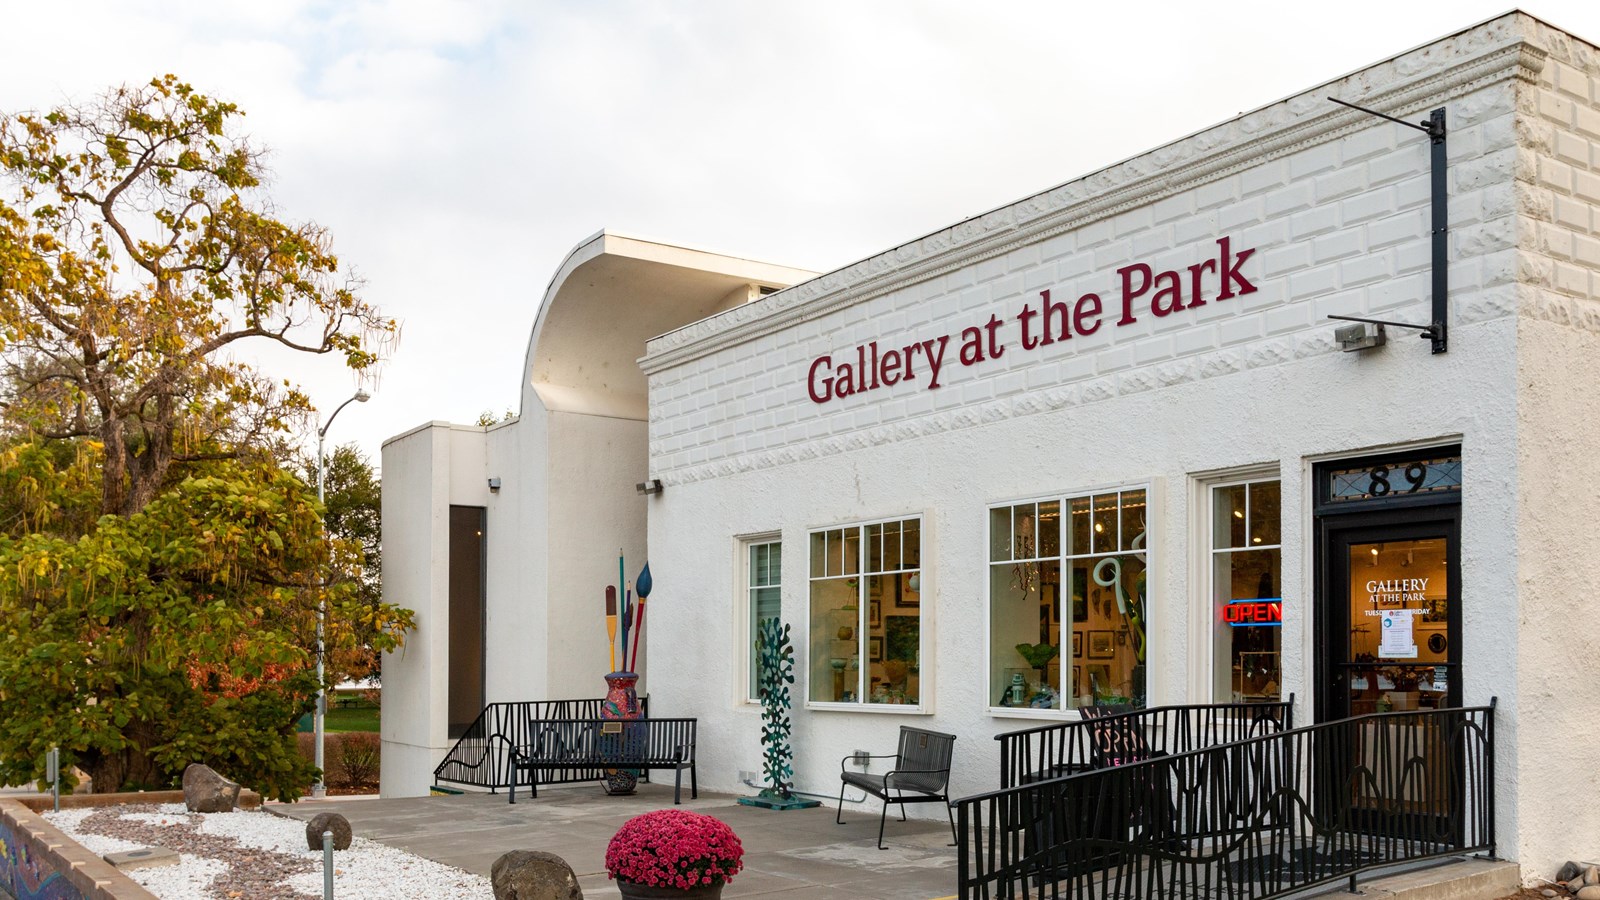 Color photo of a white one-story brick building with “Gallery at the Park” in large letters.